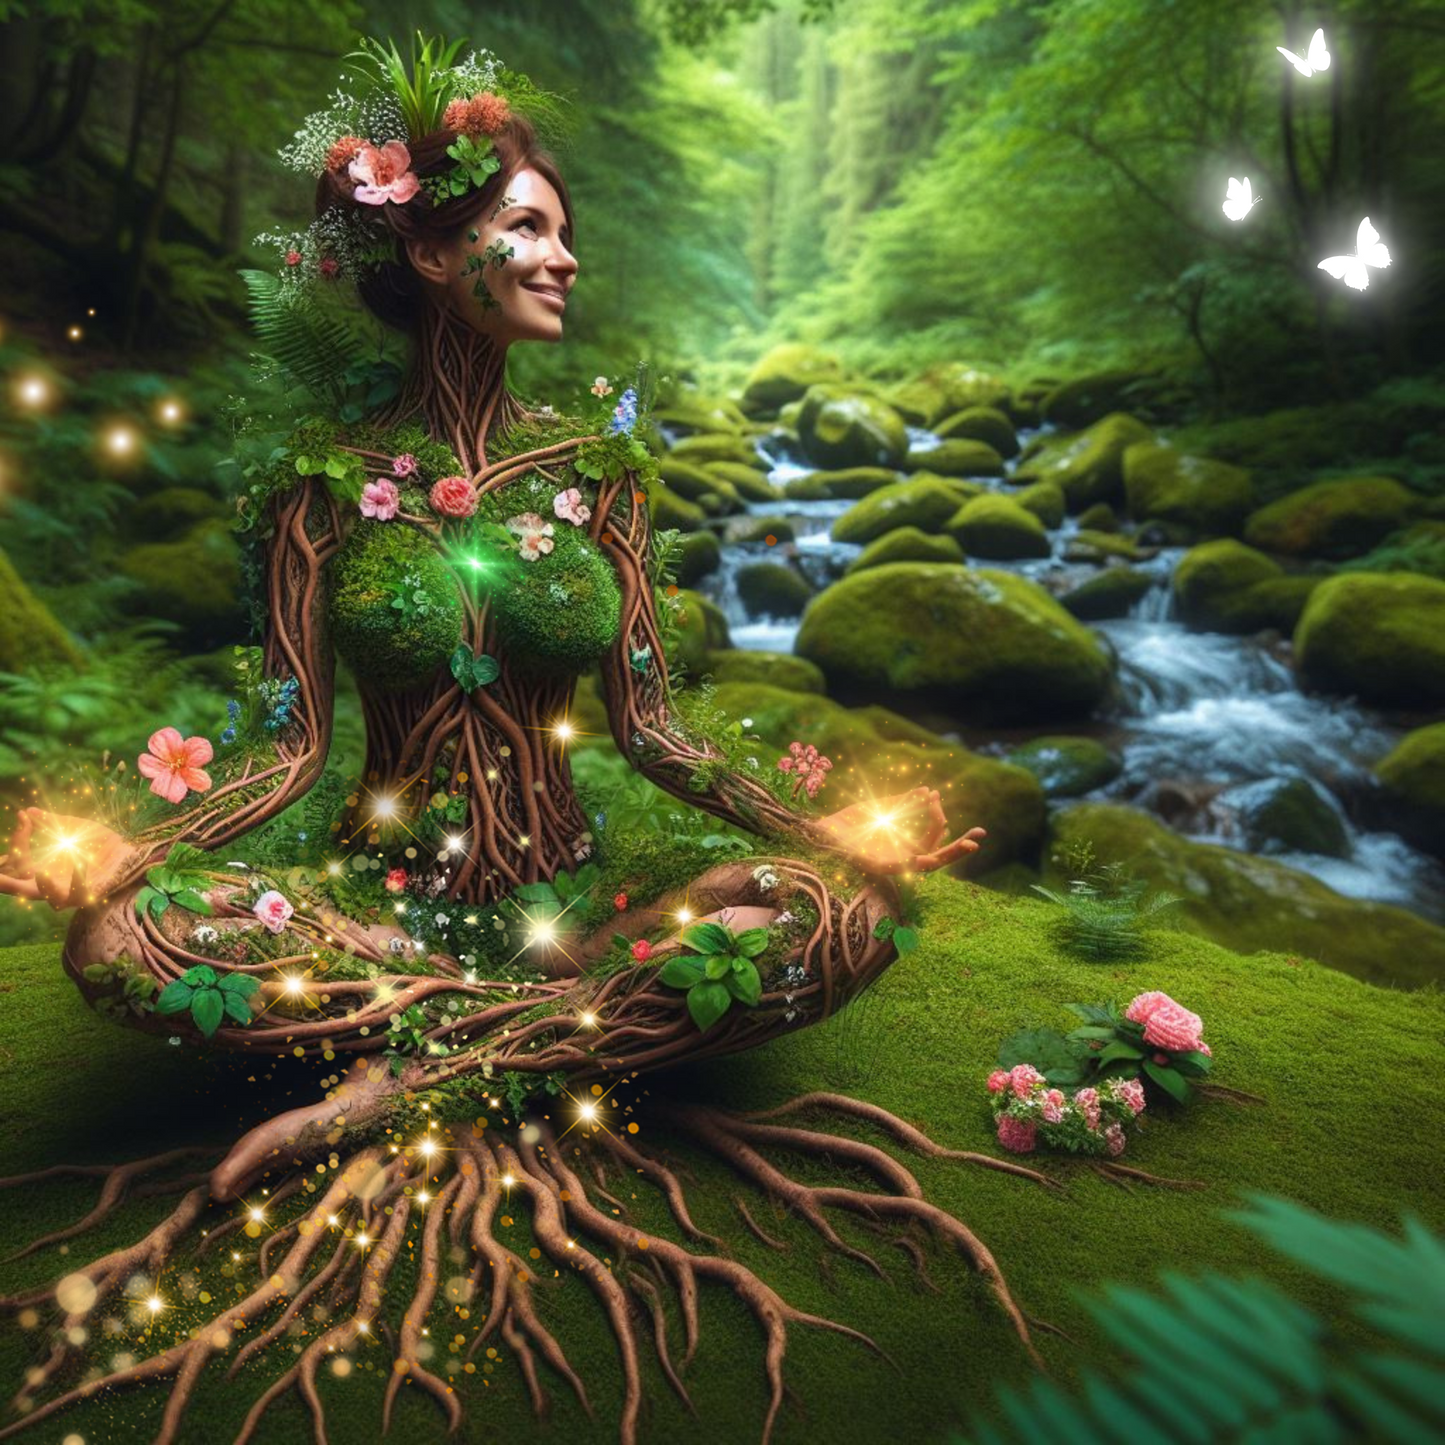 In harmony with Gaia: Coaching for grounding and harmonization - 60 min. 